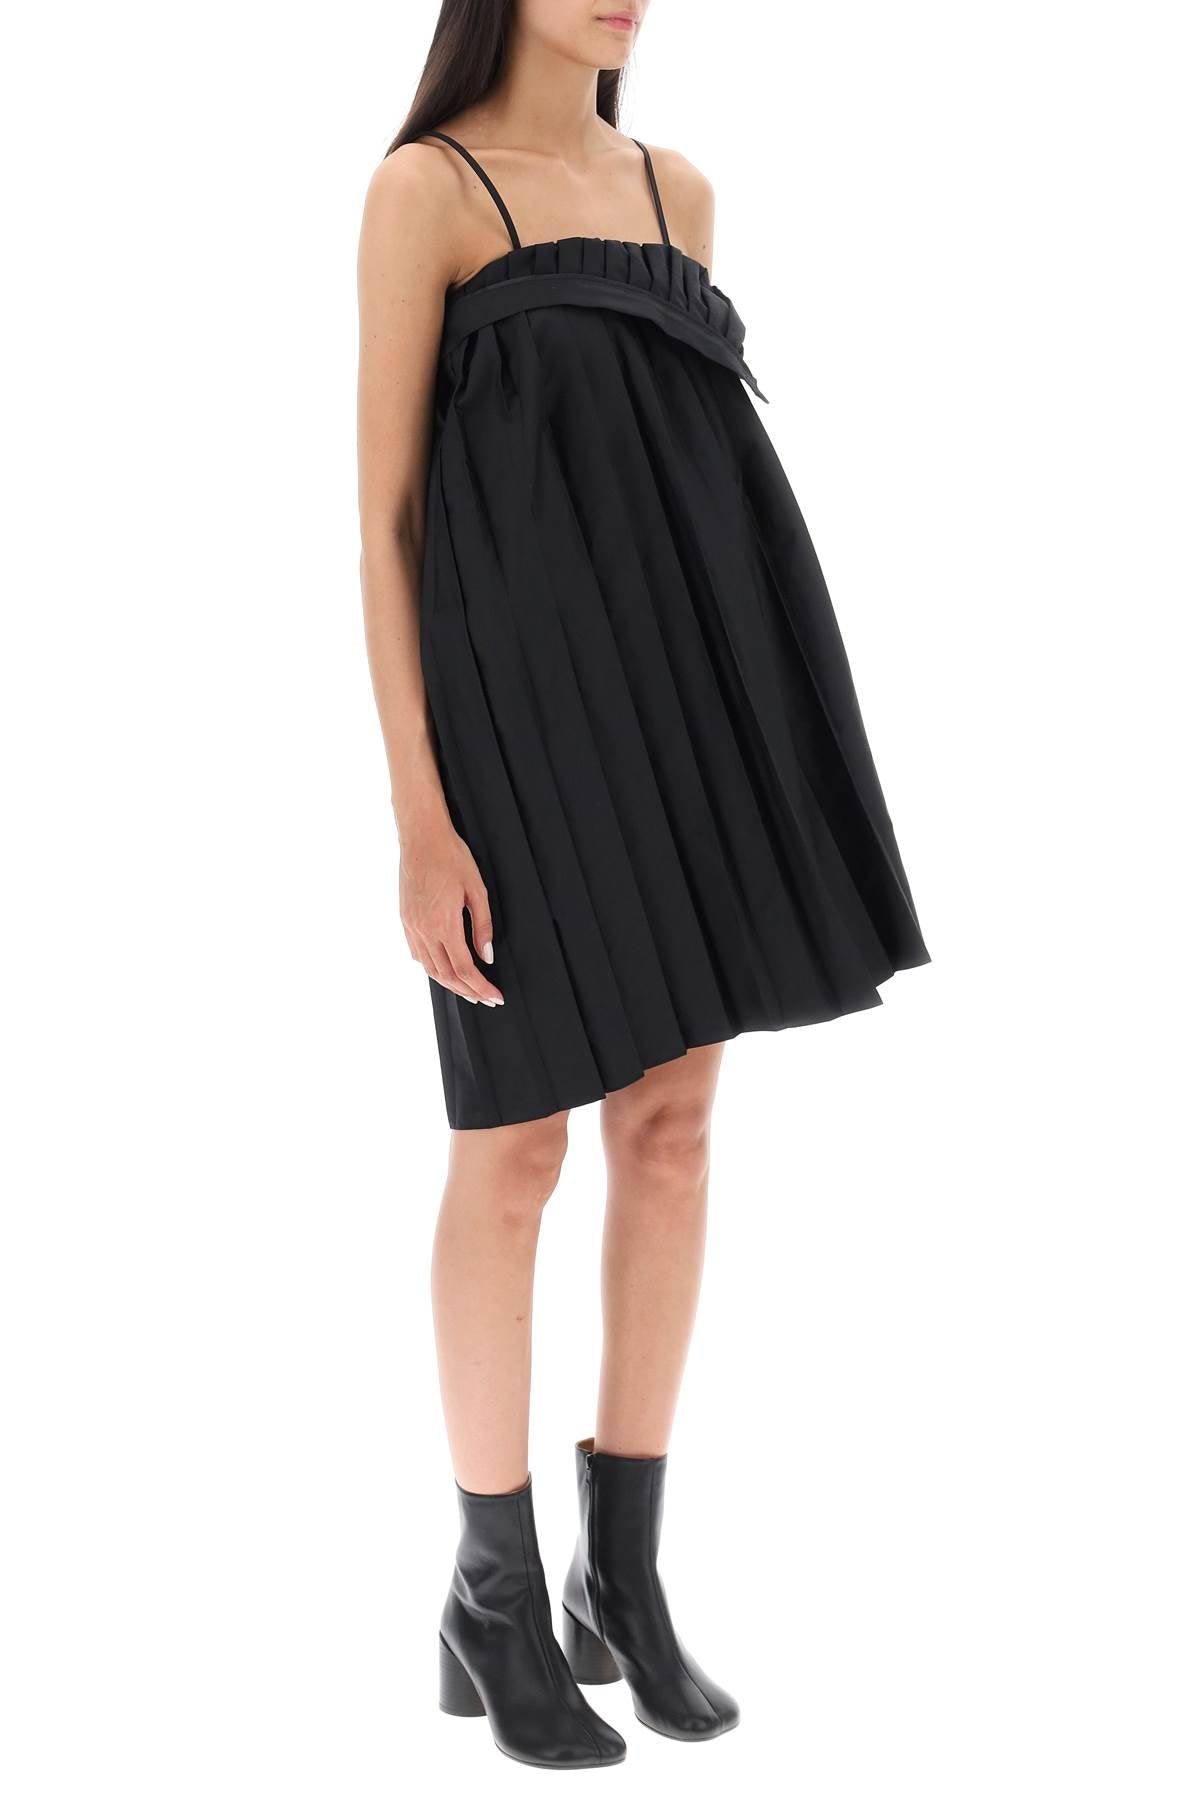 Black Pleated Mini Dress from MM6 MAISON MARGIELA Collection